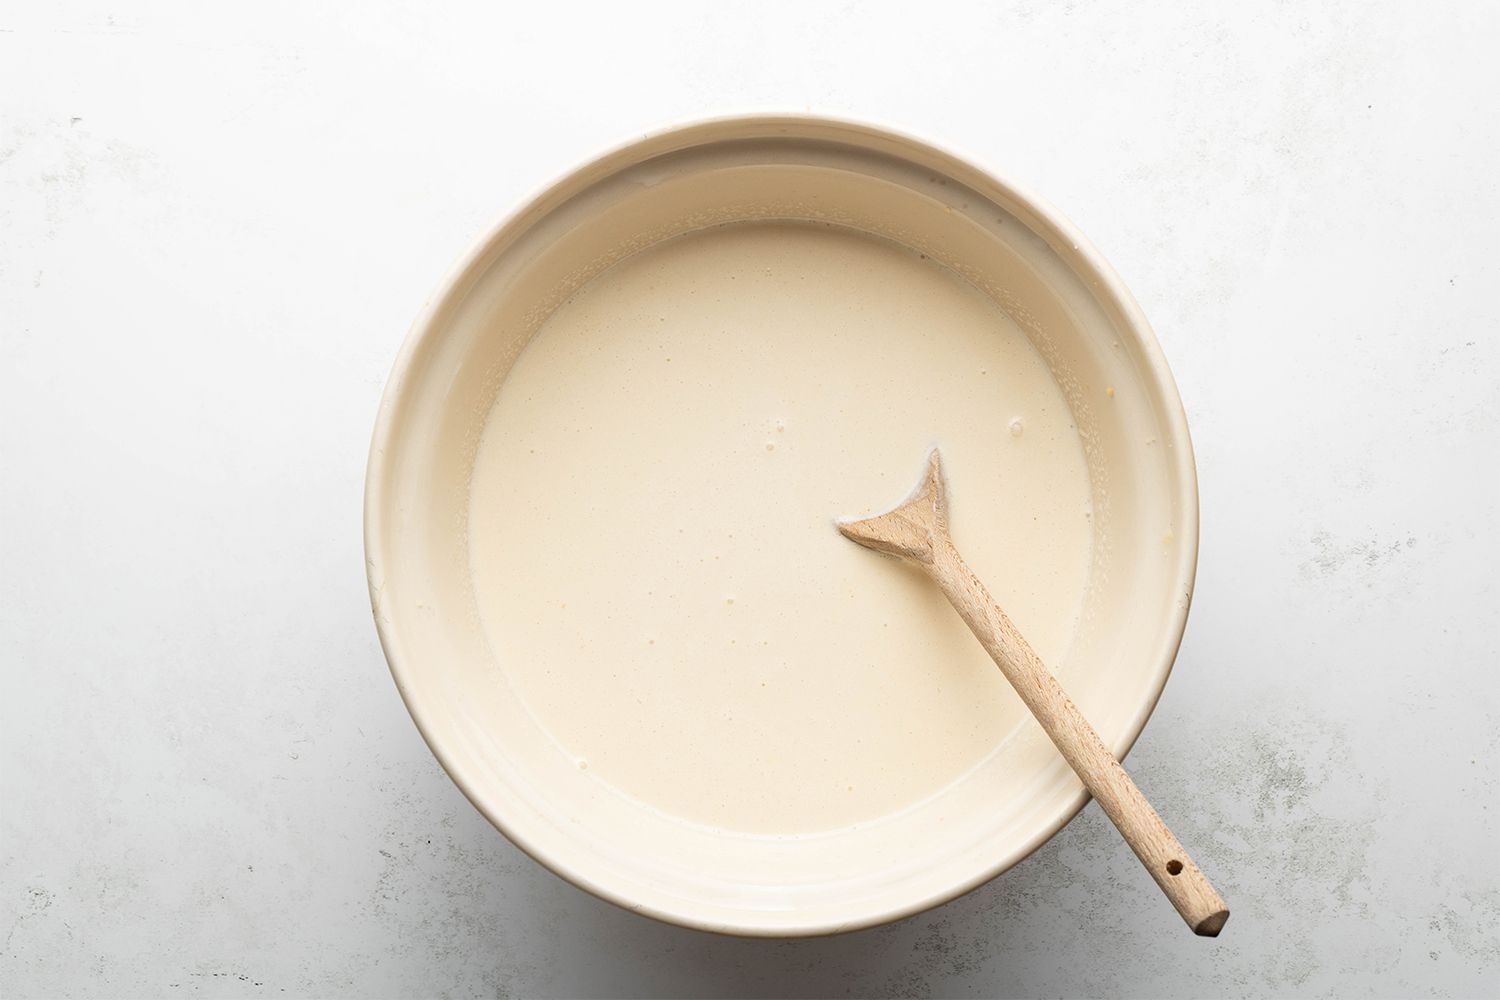 Milk, heavy cream, whiskey, and vanilla mixture in a bowl with a wooden spoon